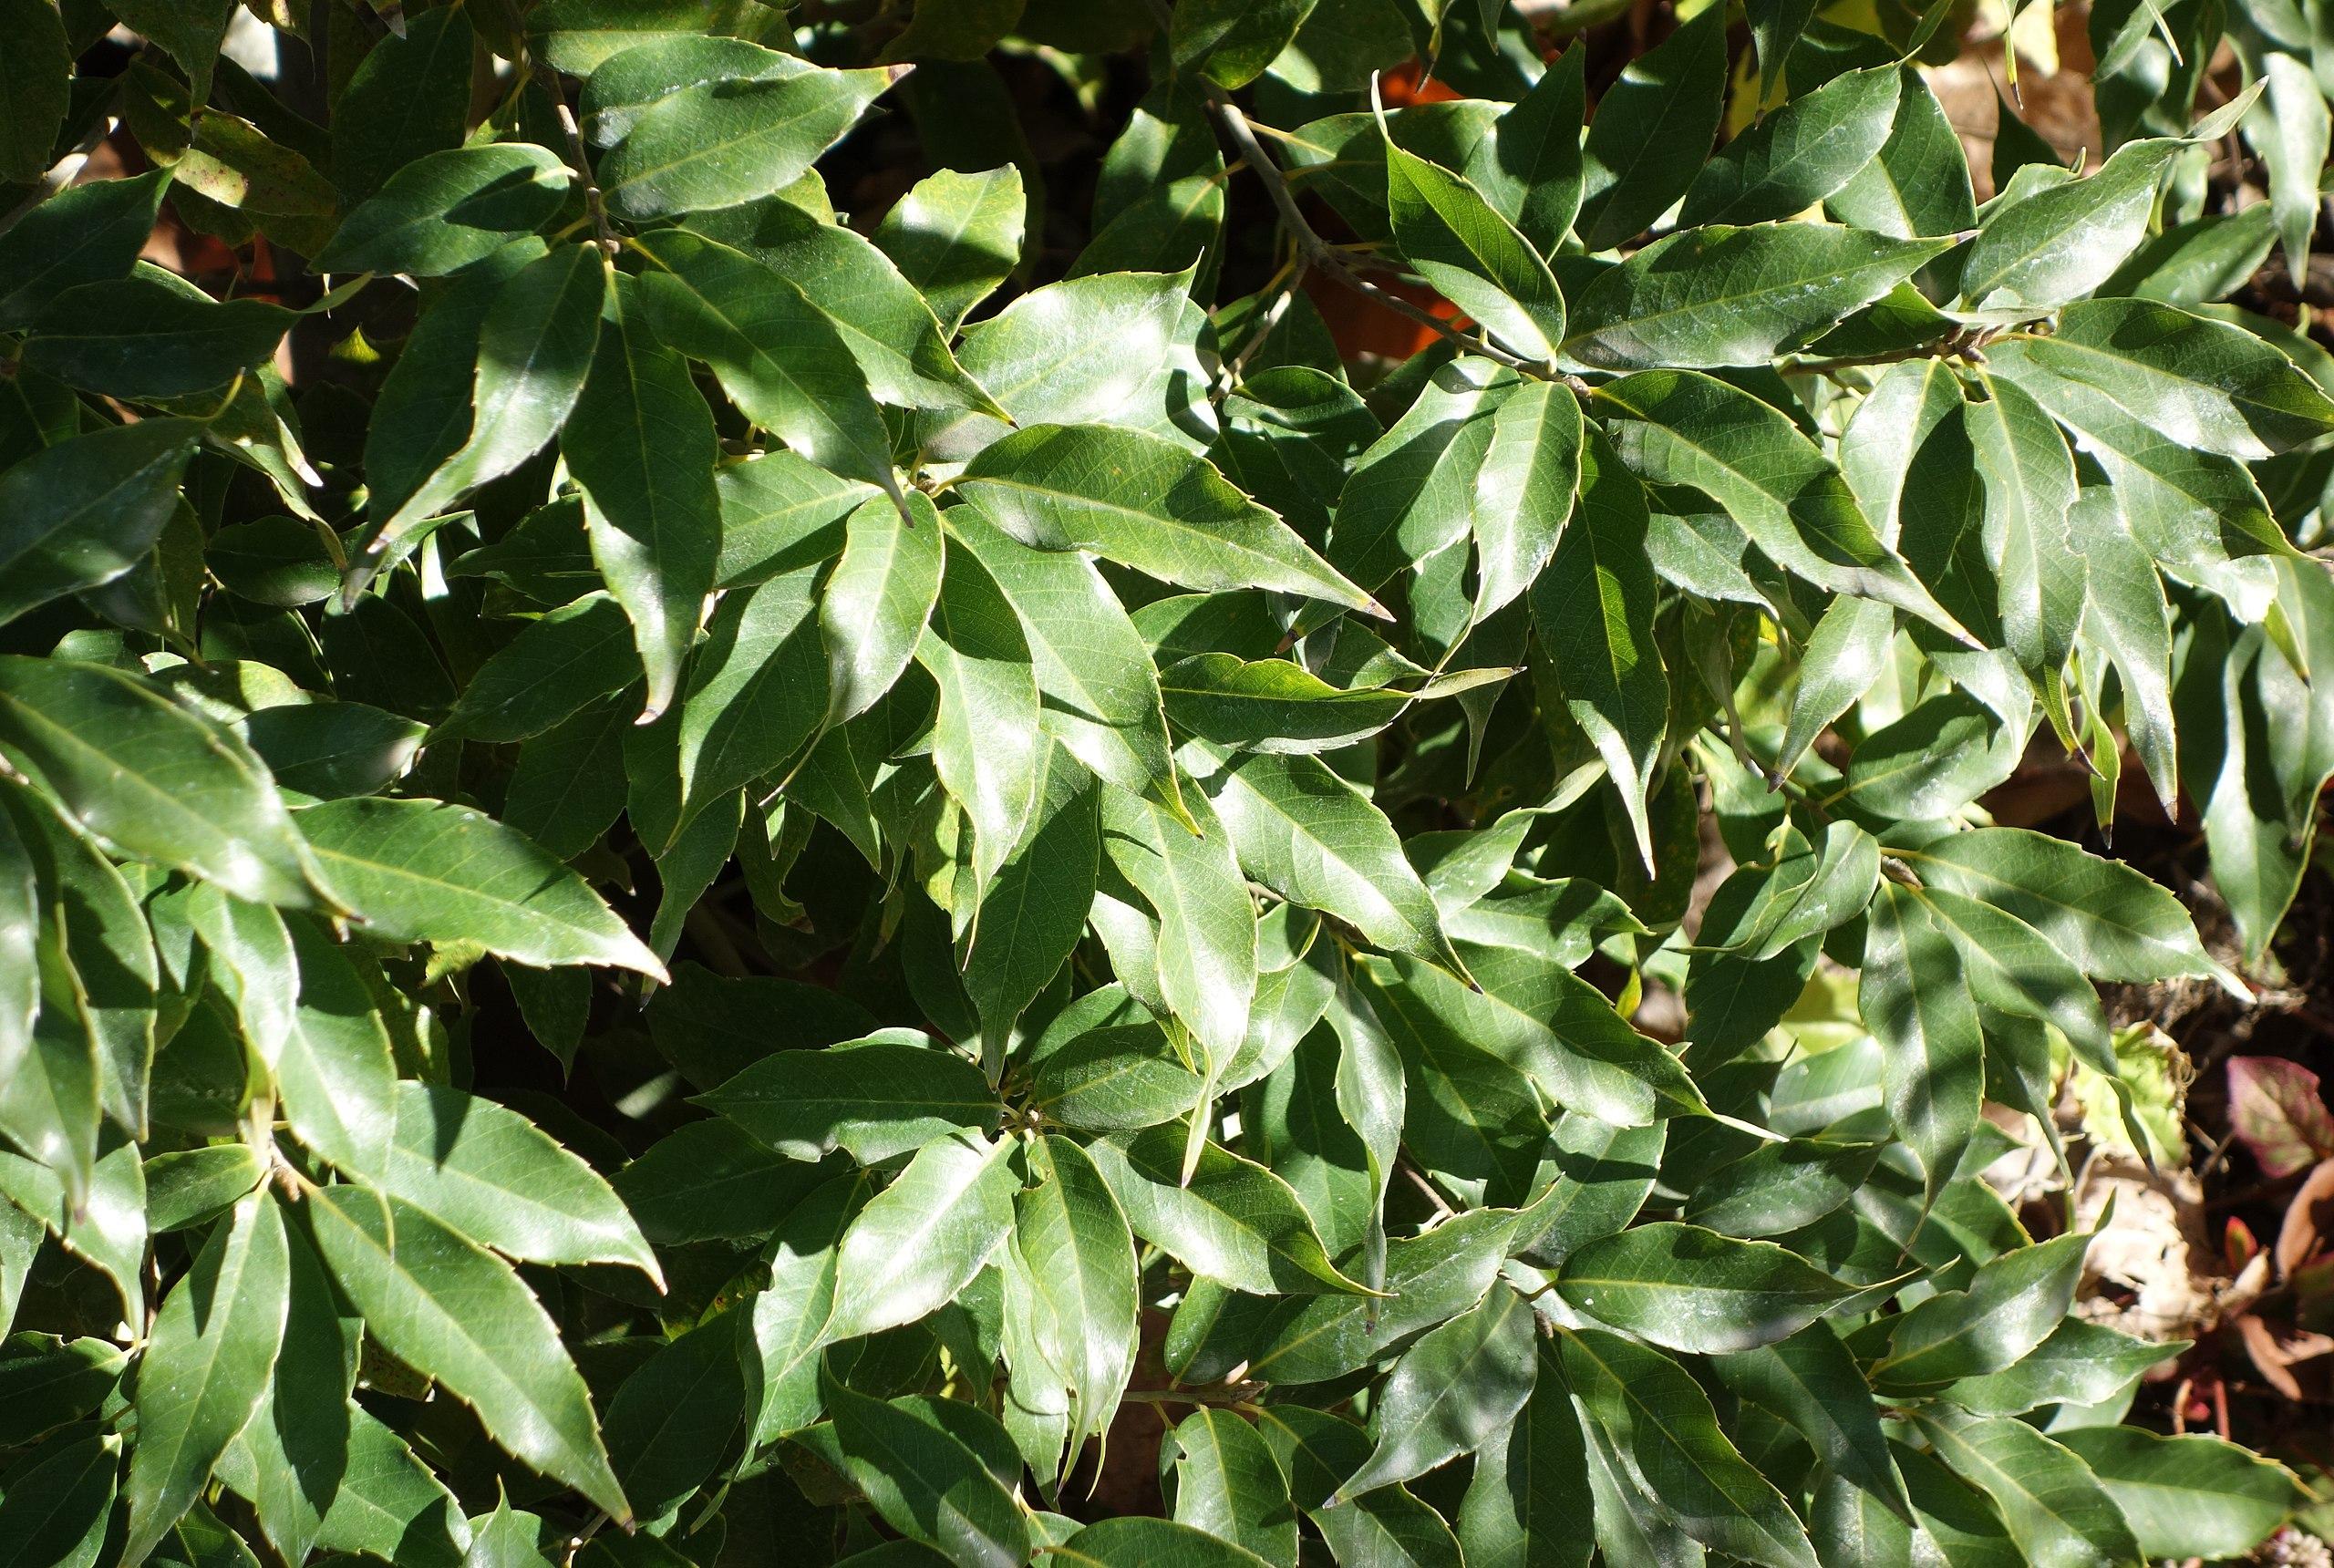 Green leaves with yellow petiole and midrib, light-brown stems.